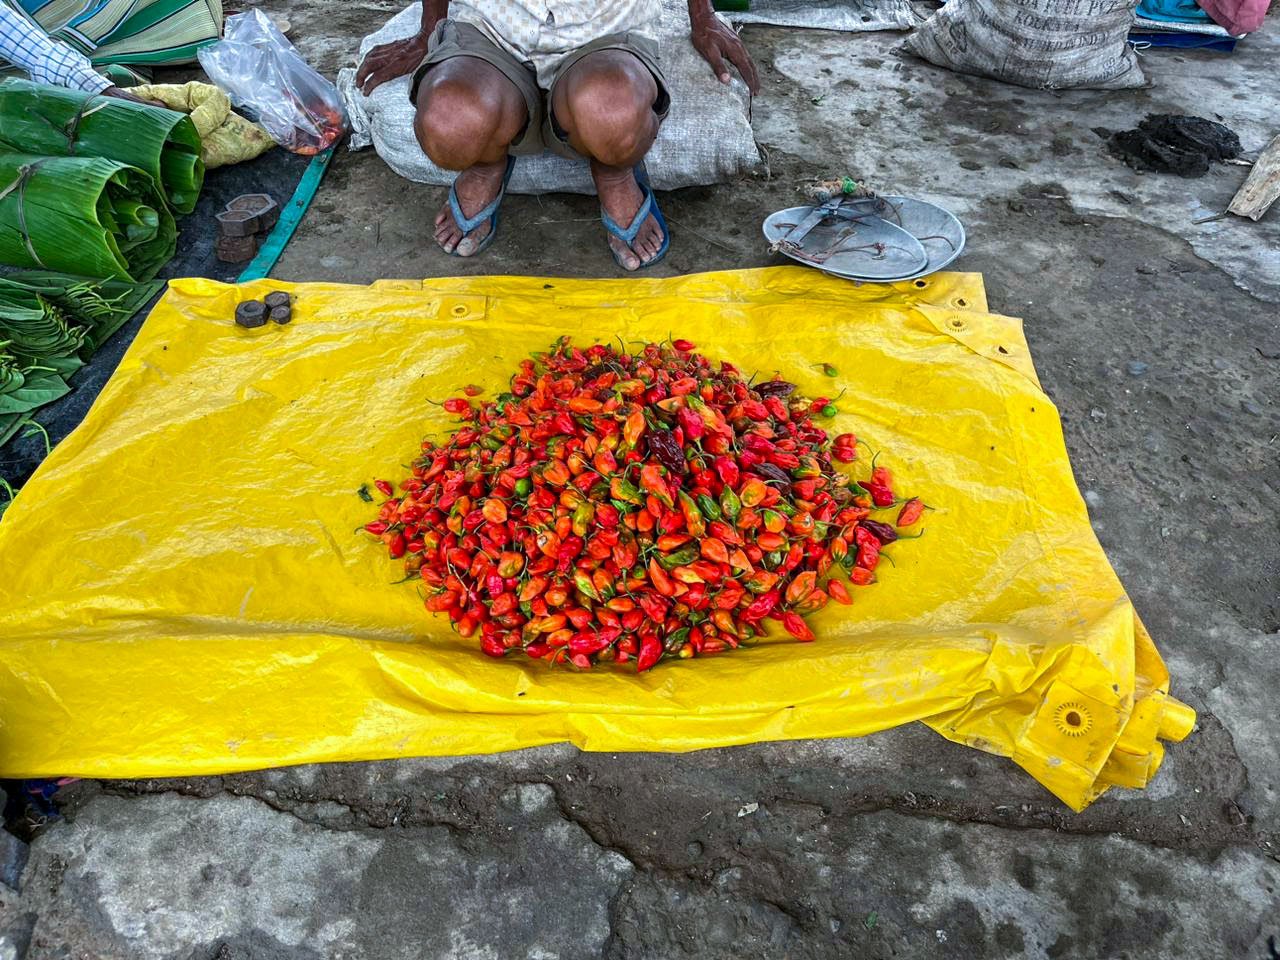 These thumb-sized red chillies, once named hottest in the world, are known by many names: king chillies, ghost peppers, bhut jolokia and bongan hingbu